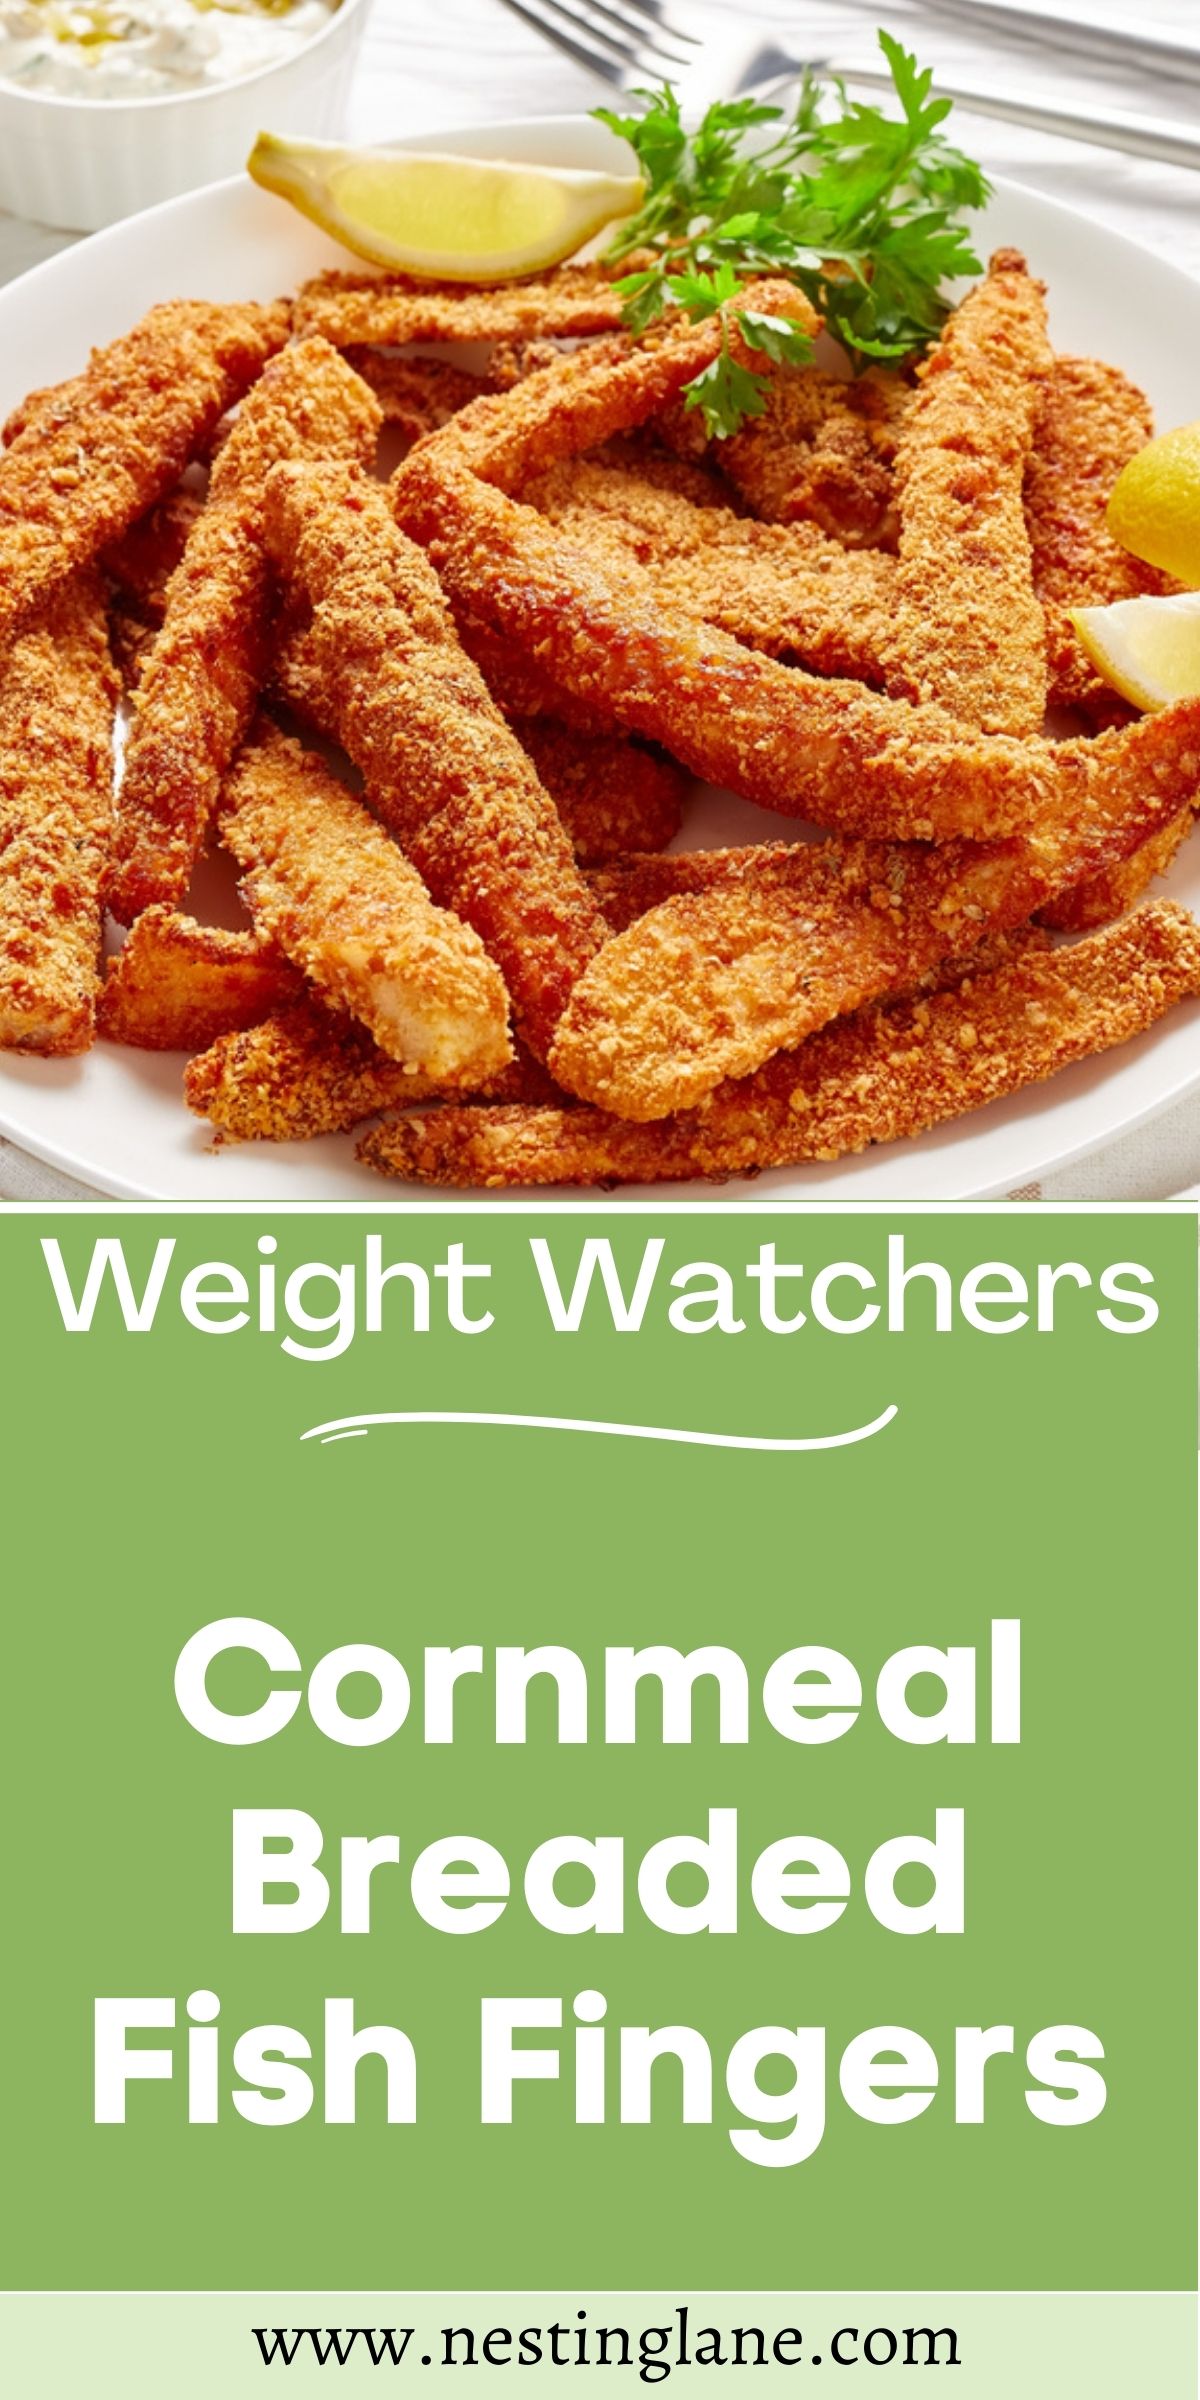 Graphic for Pinterest of Weight Watchers Cornmeal Breaded Fish Fingers.